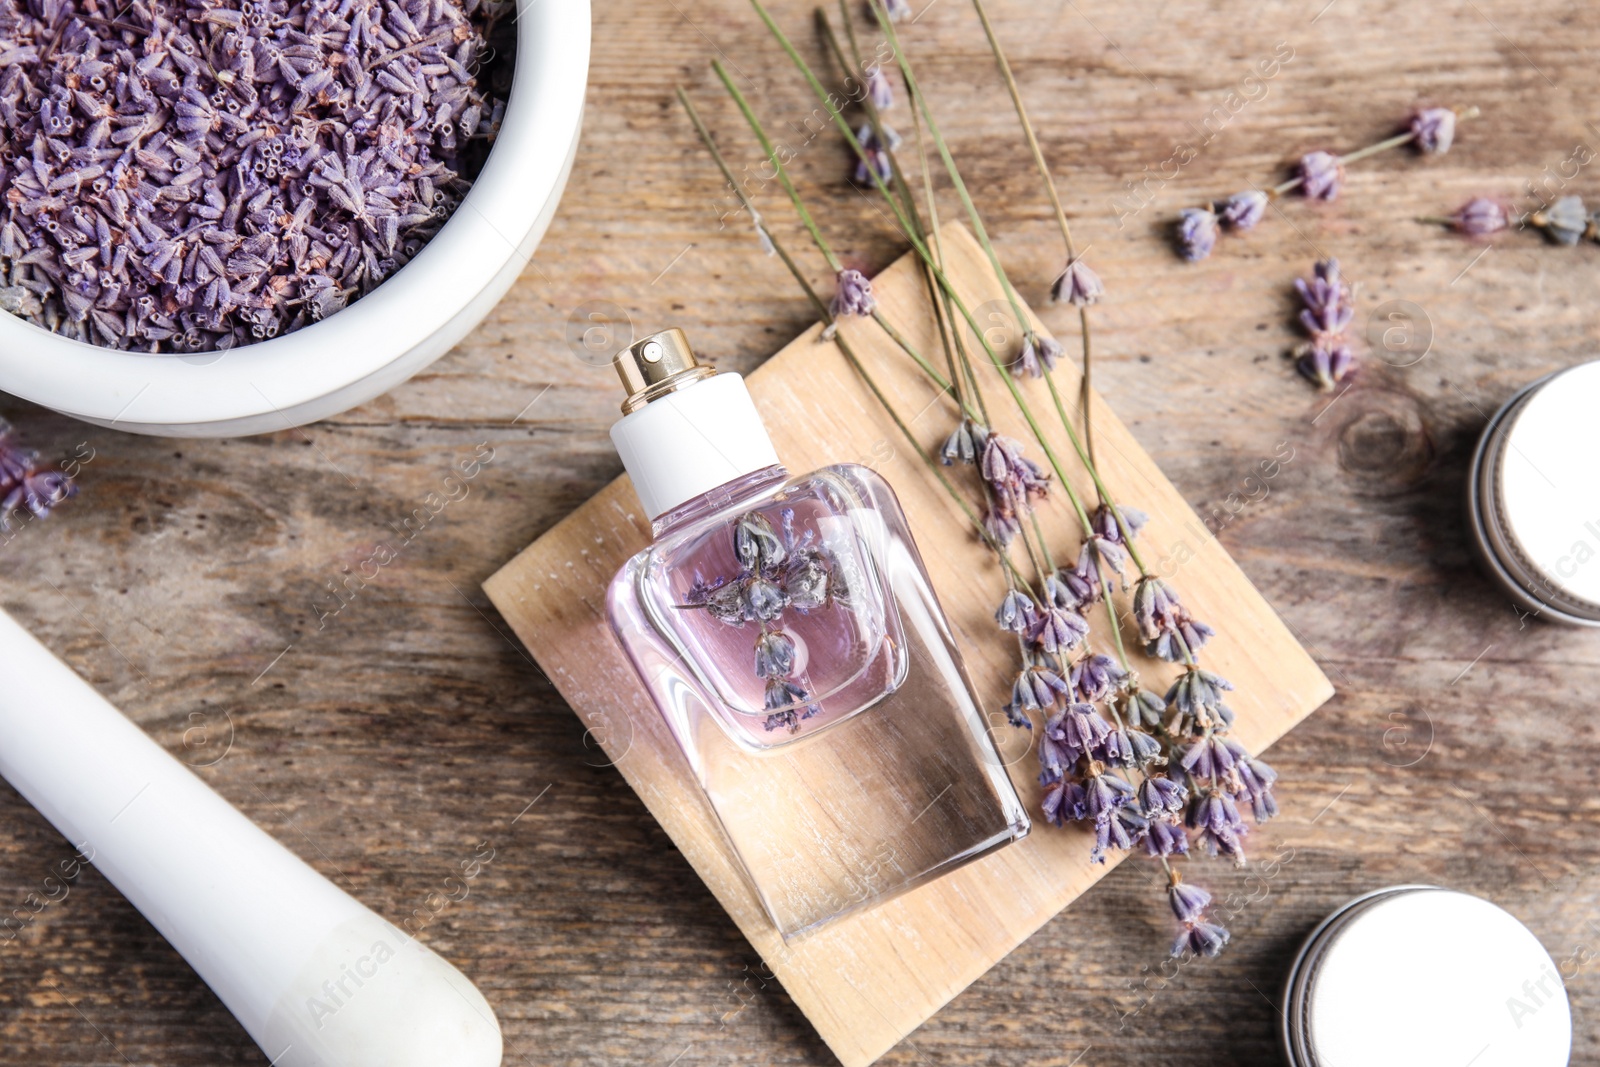 Photo of Flat lay composition with lavender flowers and natural cosmetic on wooden background